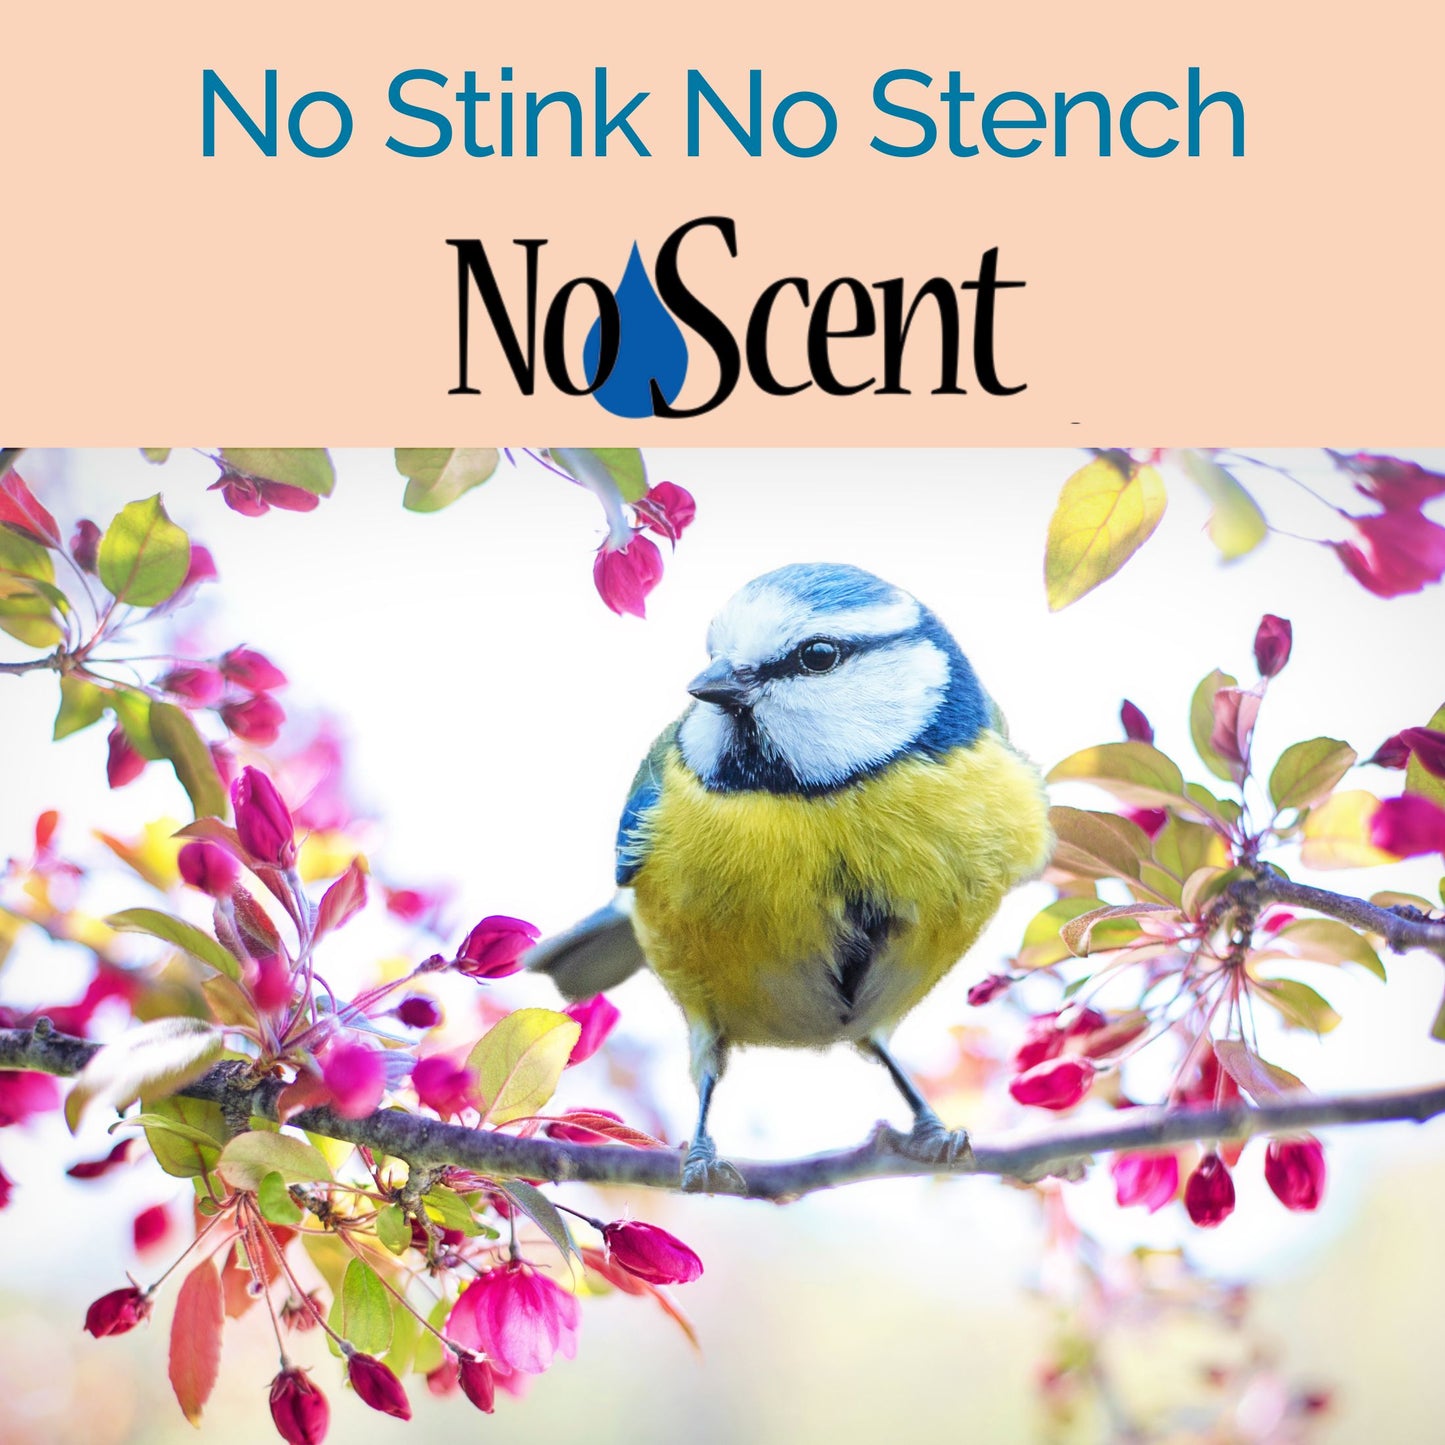 No Scent Bird Cage Cleaner Spray, Natural Aviary Freshener for Poop, Droppings, Urine & Secretions